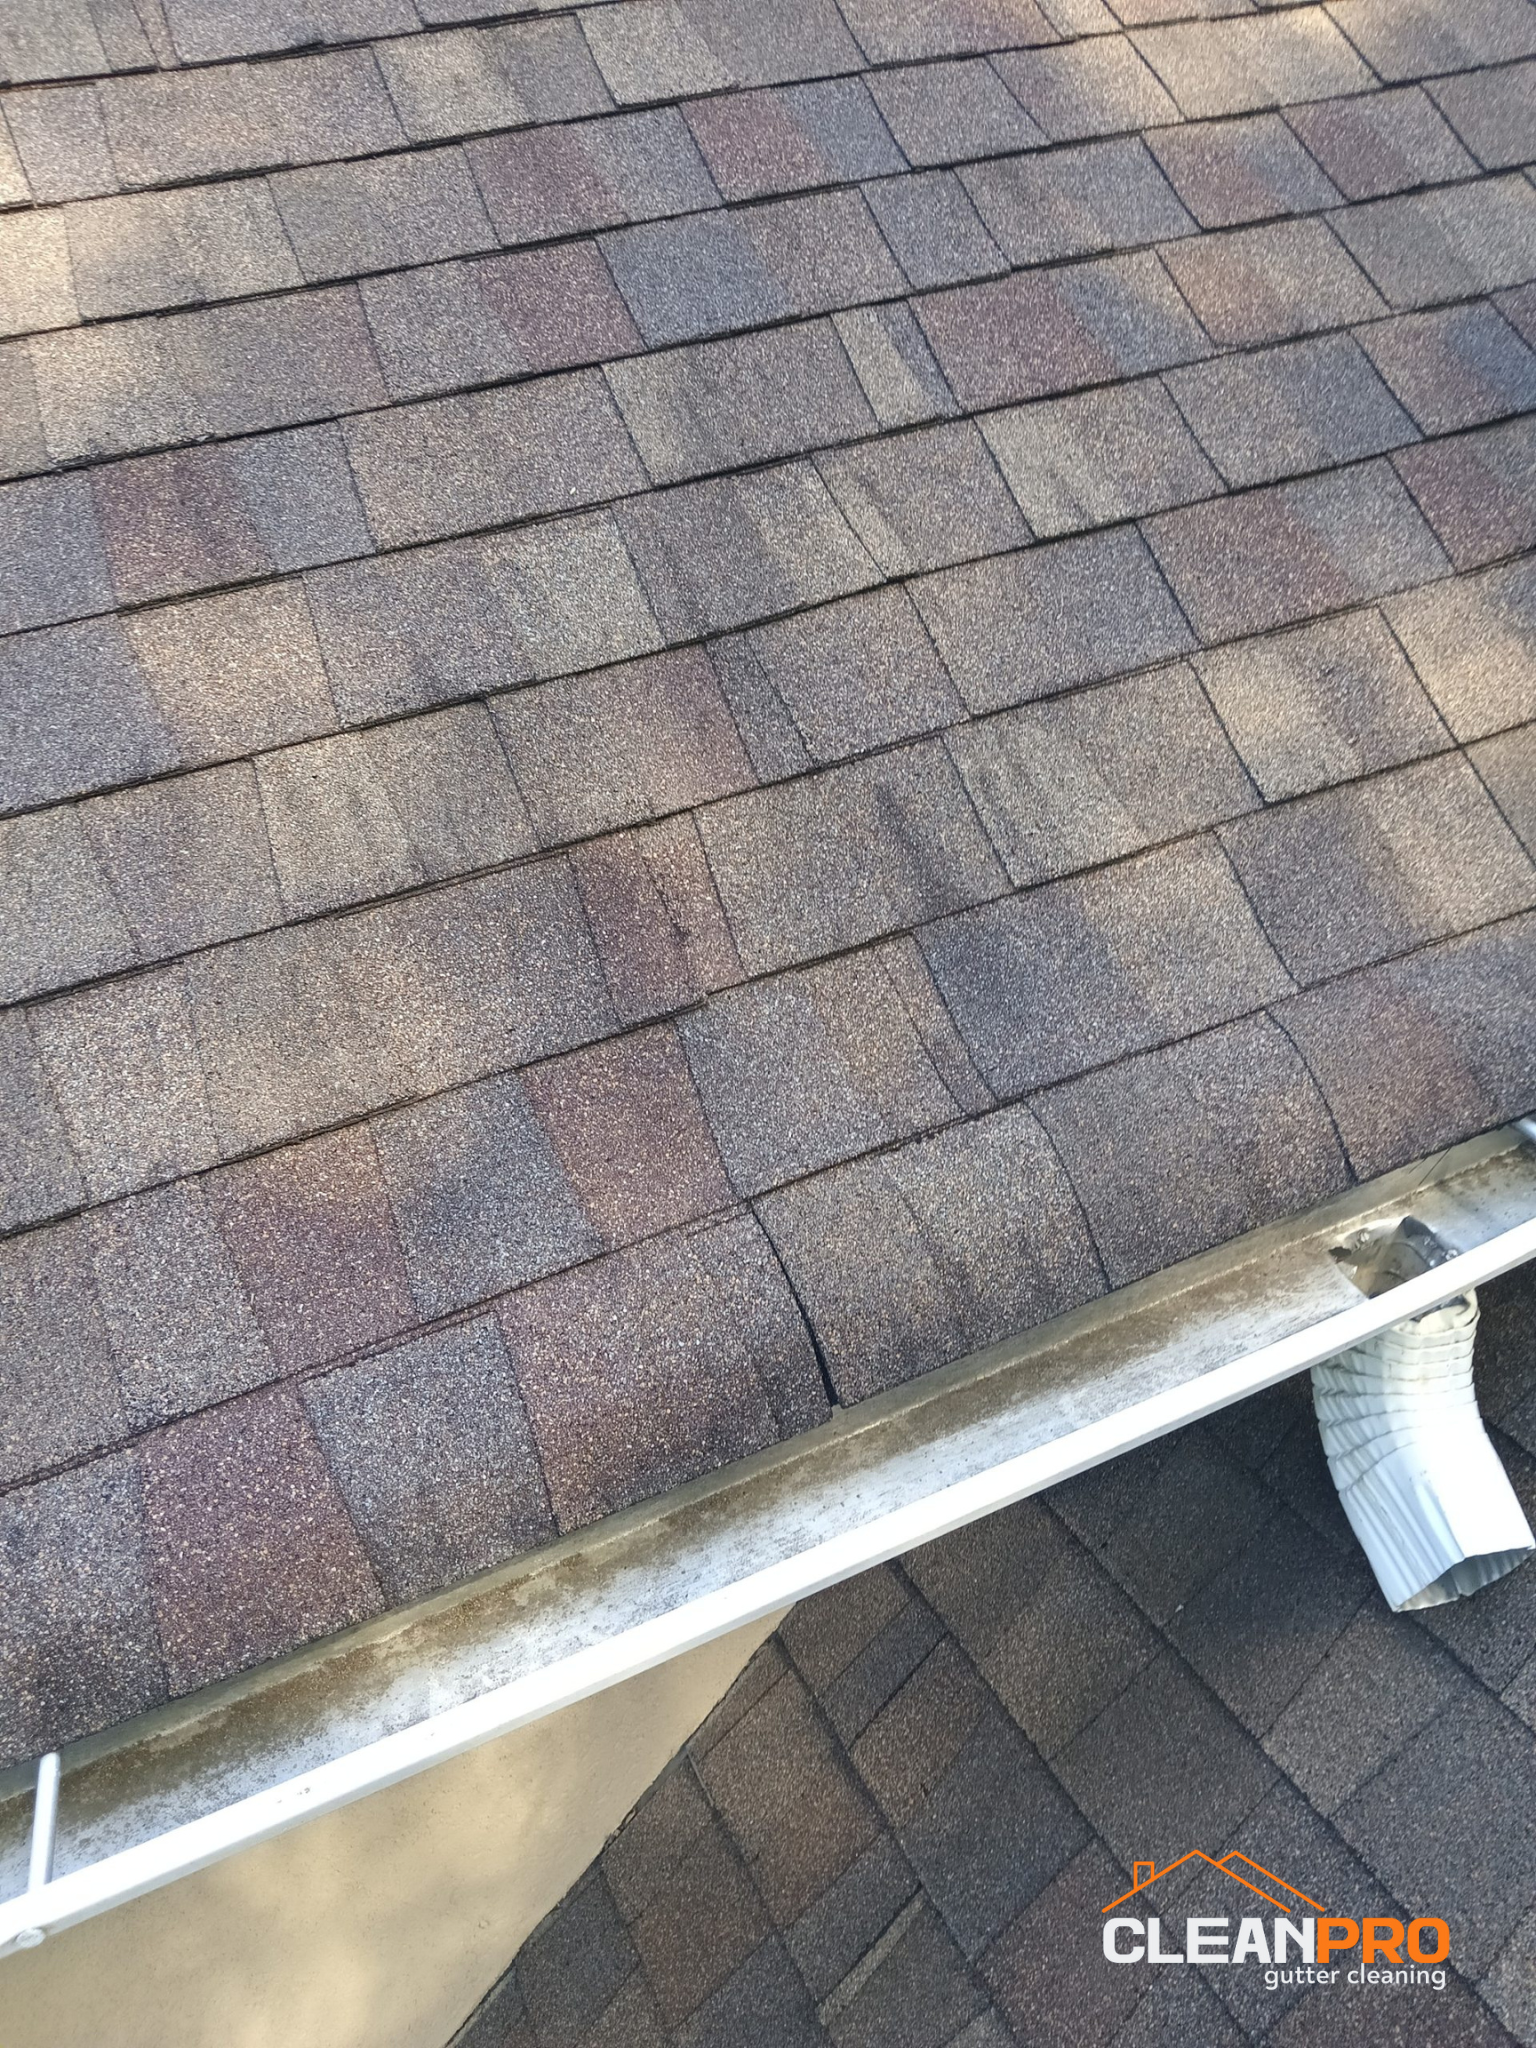 Quality Gutter Cleaning in Houston TX